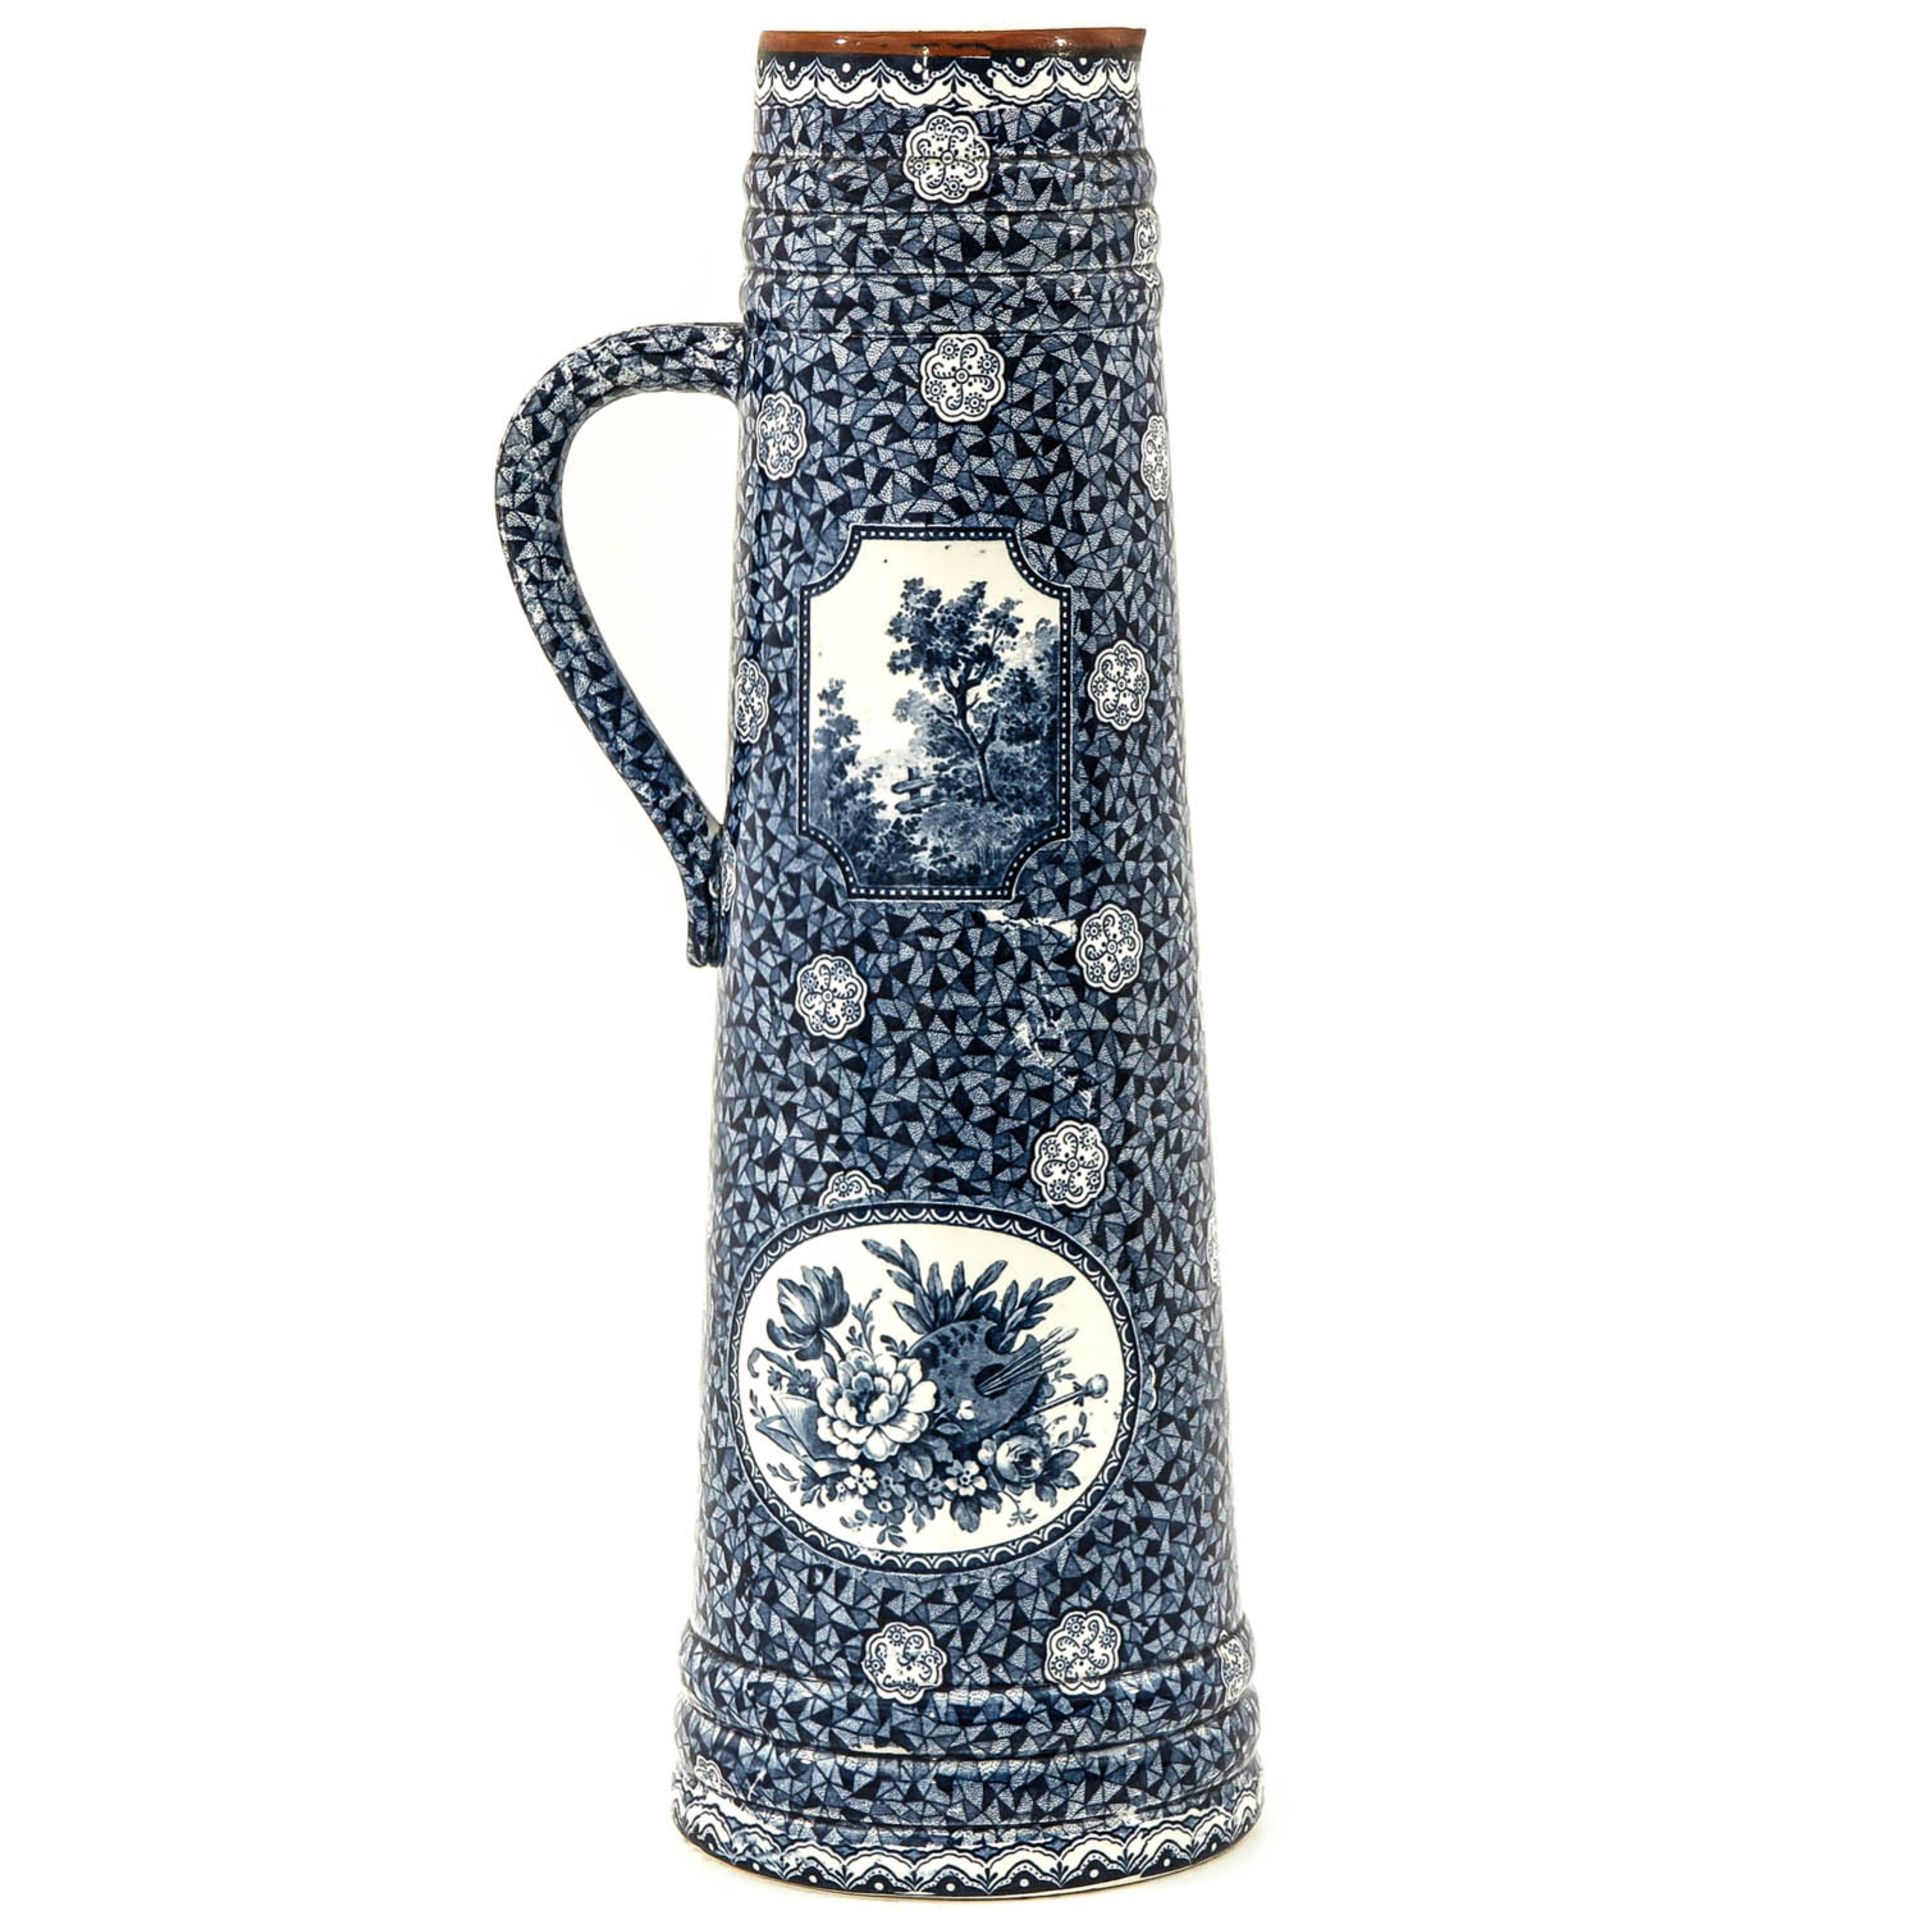 A Villeroy and Boch Pitcher - Image 3 of 10